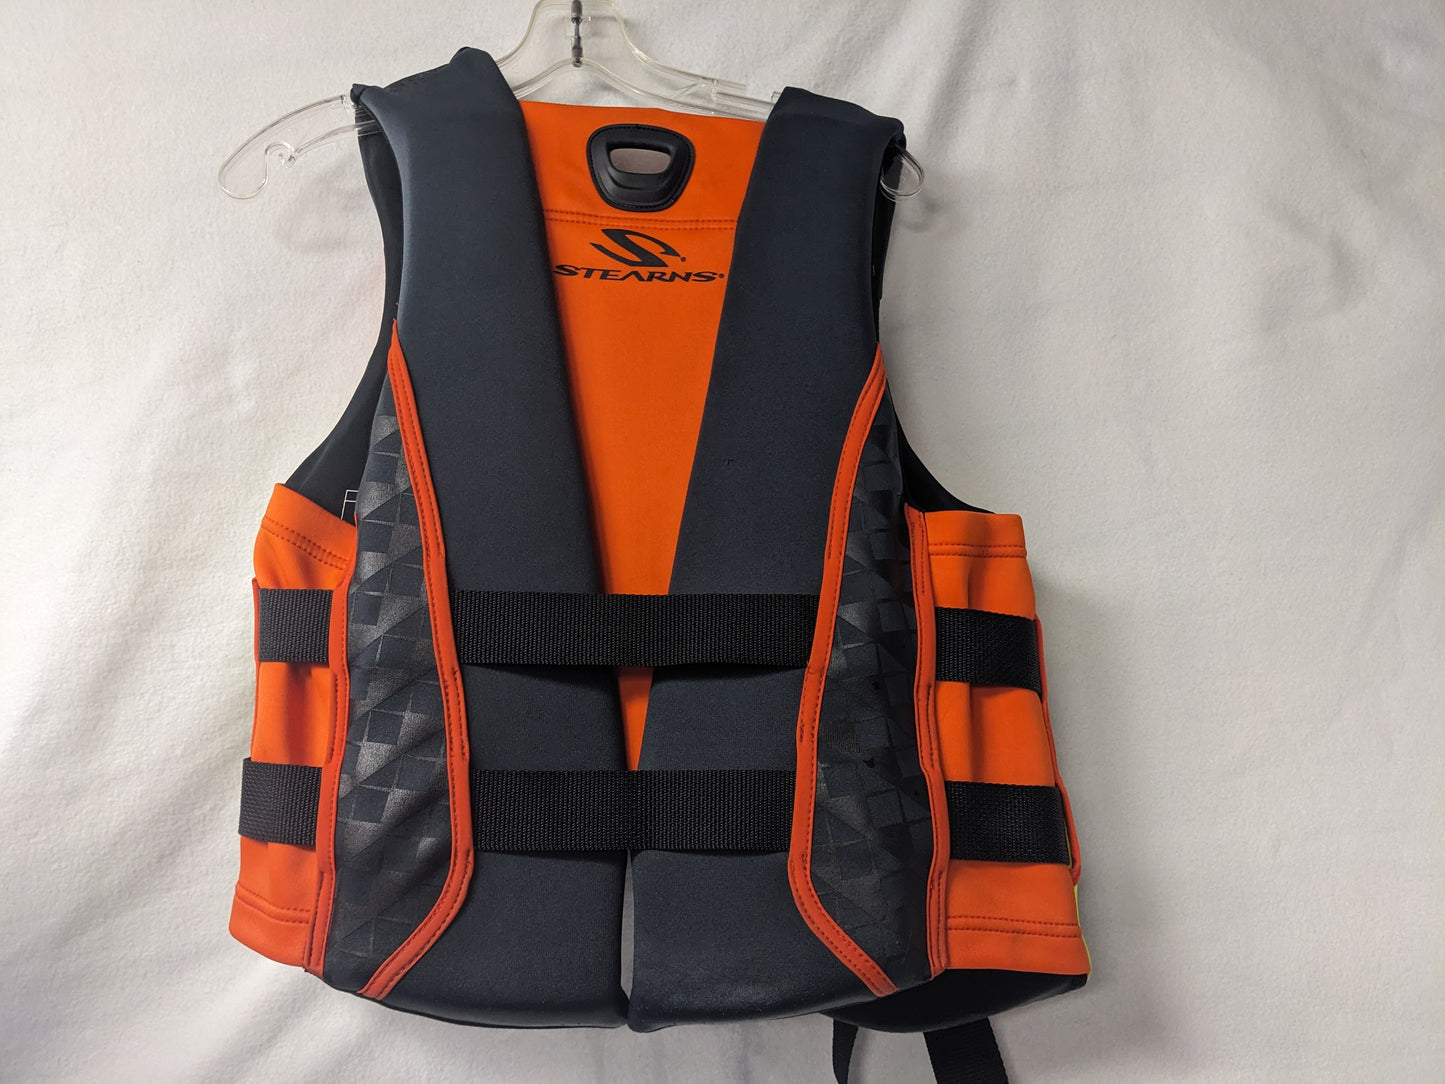 Stearns Type Ill PFD Youth Ski Vest Size Small Color Orange Condition Used